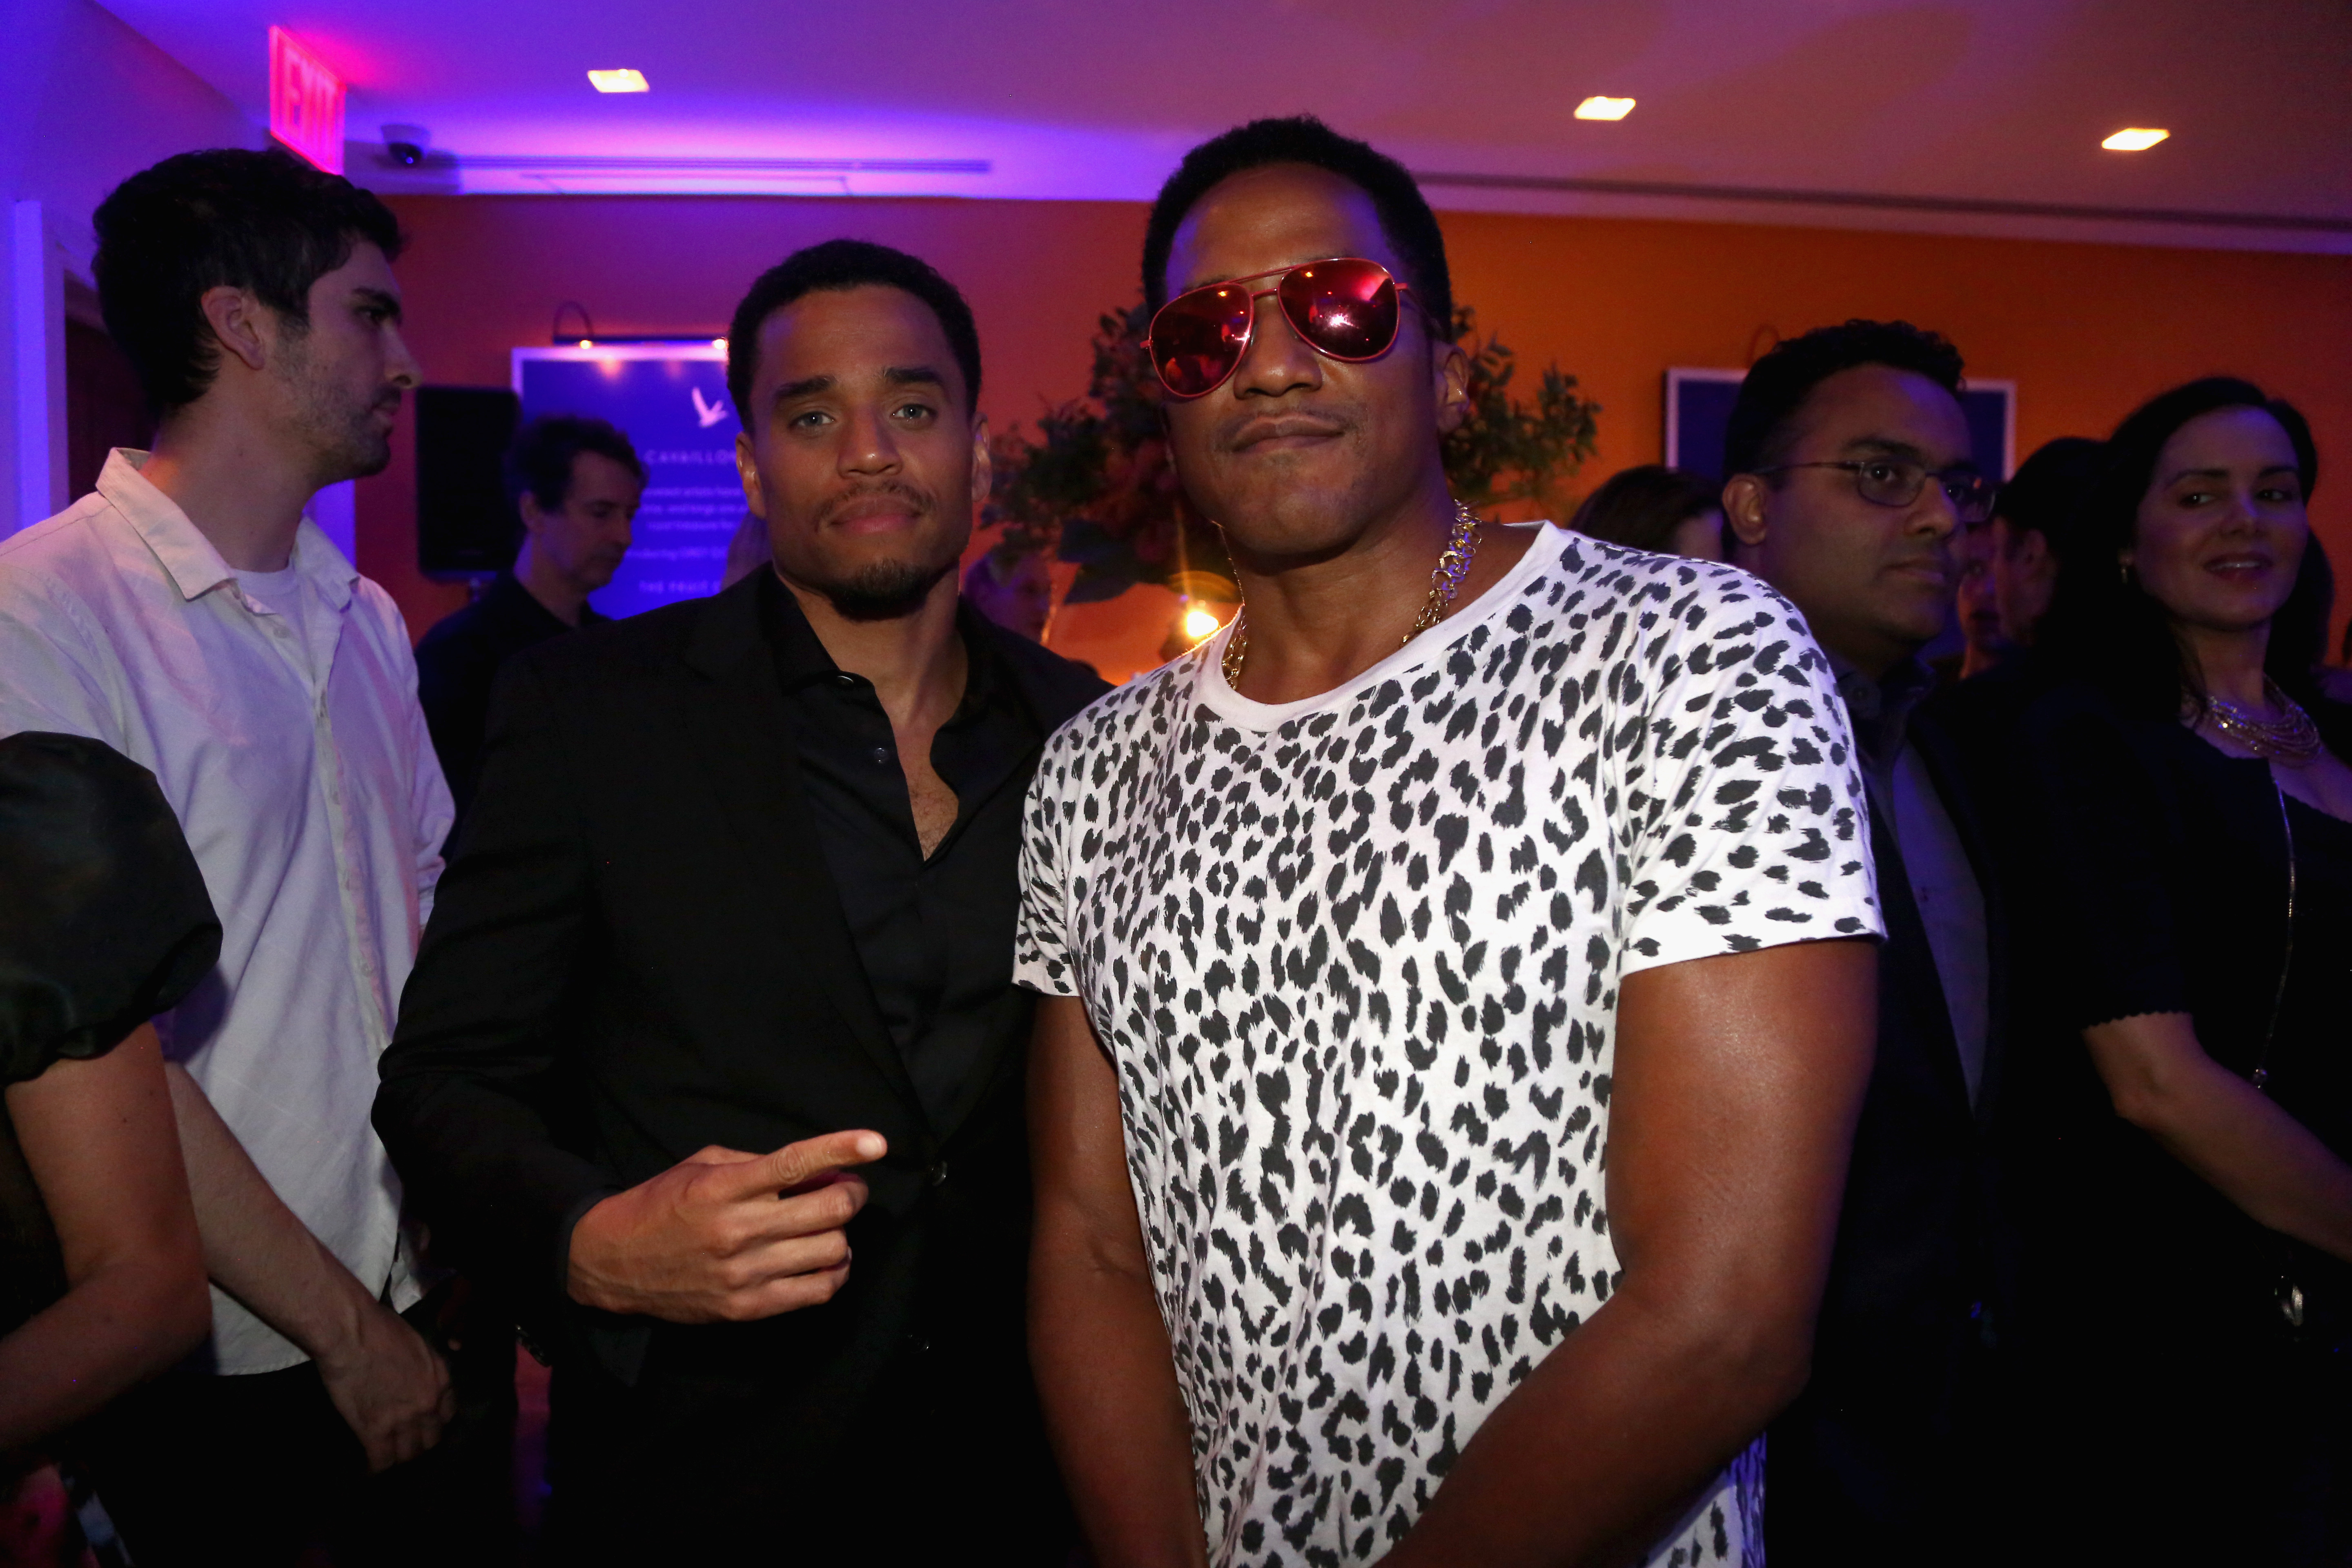 NEW YORK, NY - JUNE 18:  (L-R) Actor Michael Ealy and recording artist Q-Tip attend an evening with Kehinde Wiley & Spike Lee presented by GREY GOOSE Le Melon at Crosby Street Hotel on June 18, 2014 in New York City.  (Photo by Johnny Nunez/Getty Images for GREY GOOSE)